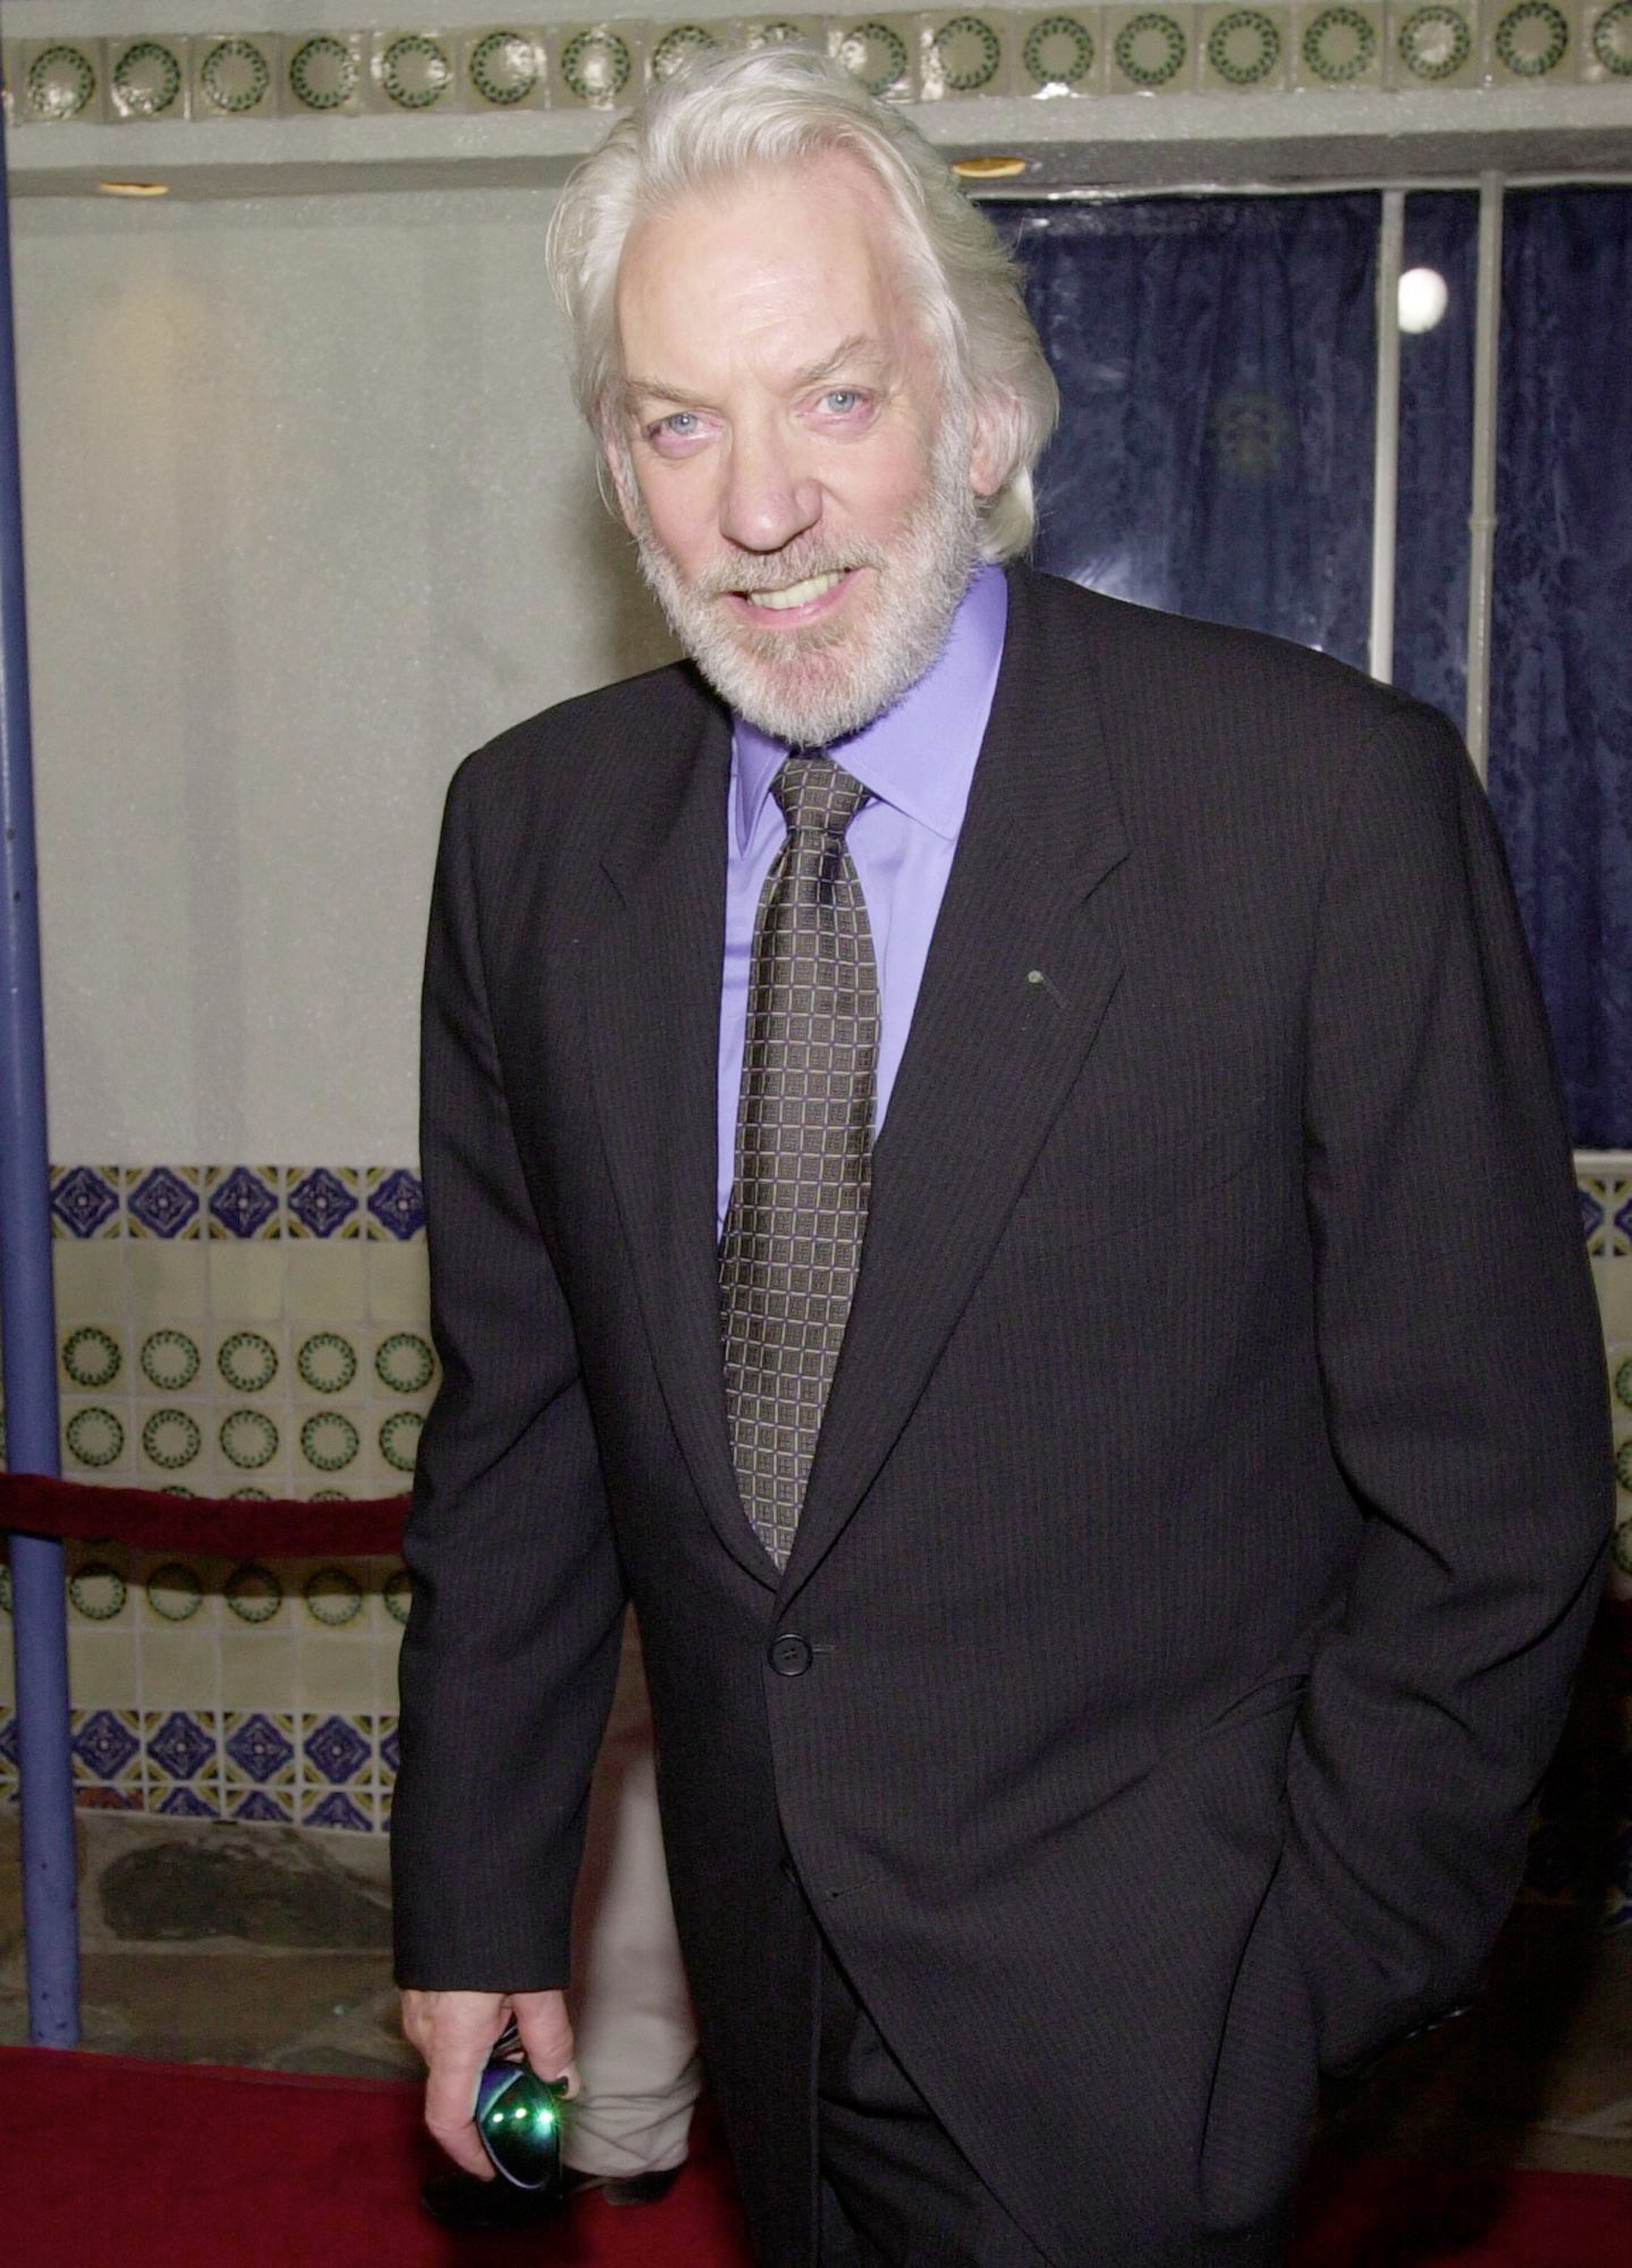 Donald Sutherland at the premiere of "Space Cowboys" on August 1, 20,00 in California | Photo: Getty Image